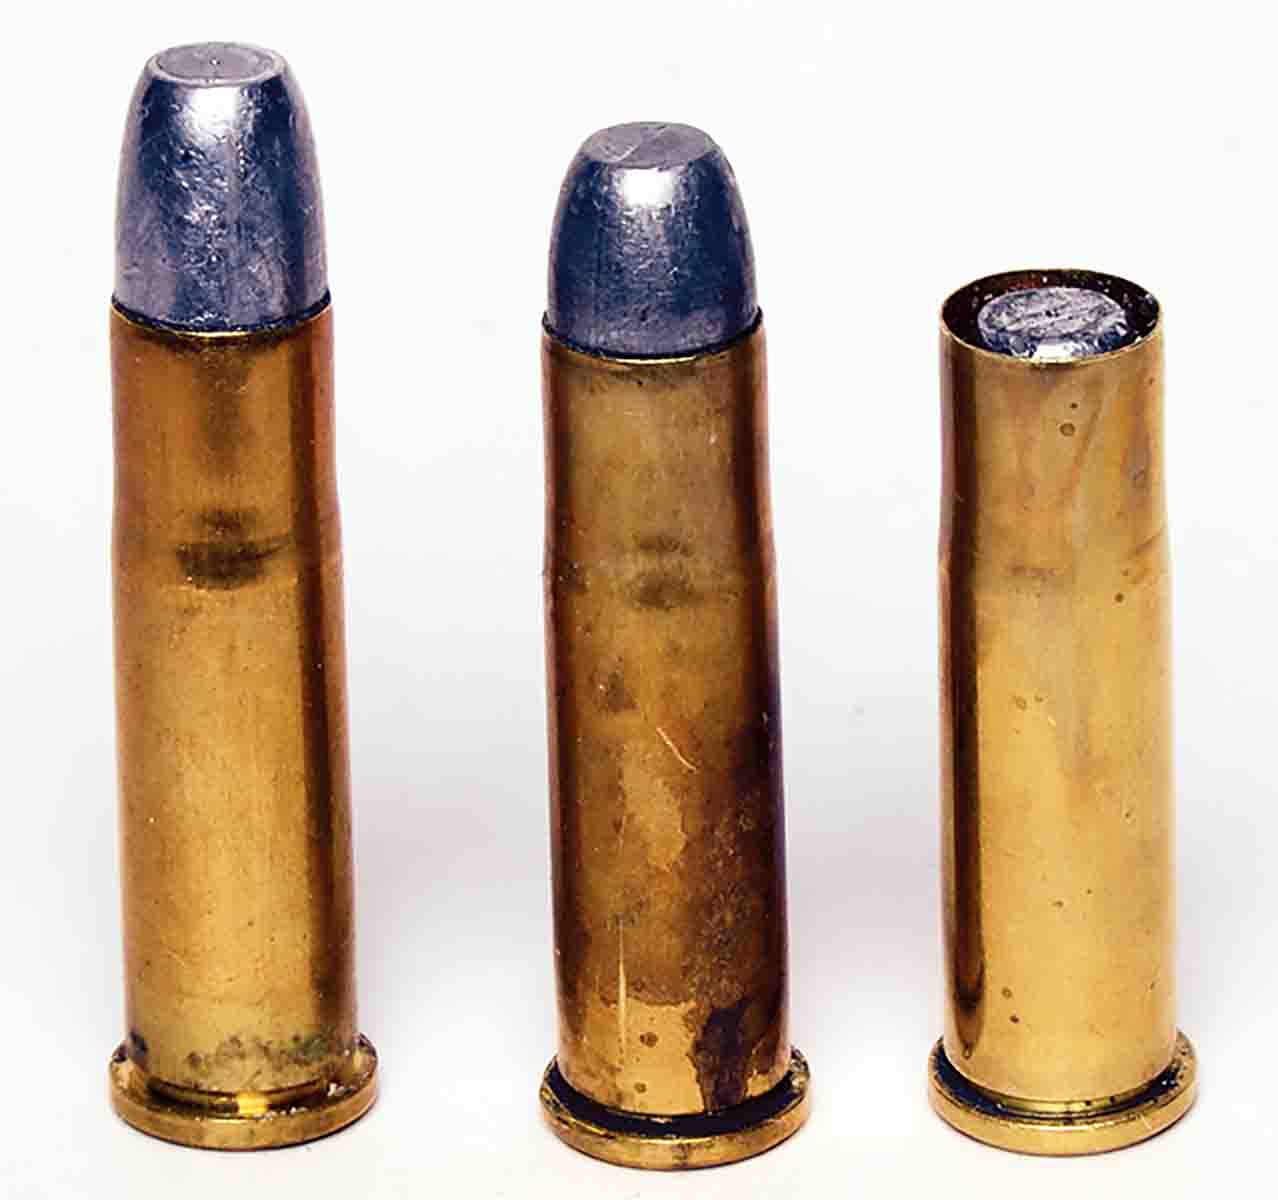 This shows what happened with cast bullets used in tubular magazine lever guns if they are not properly crimped in place. At left is a normal round. The middle round shows the bullet pushed back when five rounds were loaded in the magazine. The far right round happened when the first shot was fired.